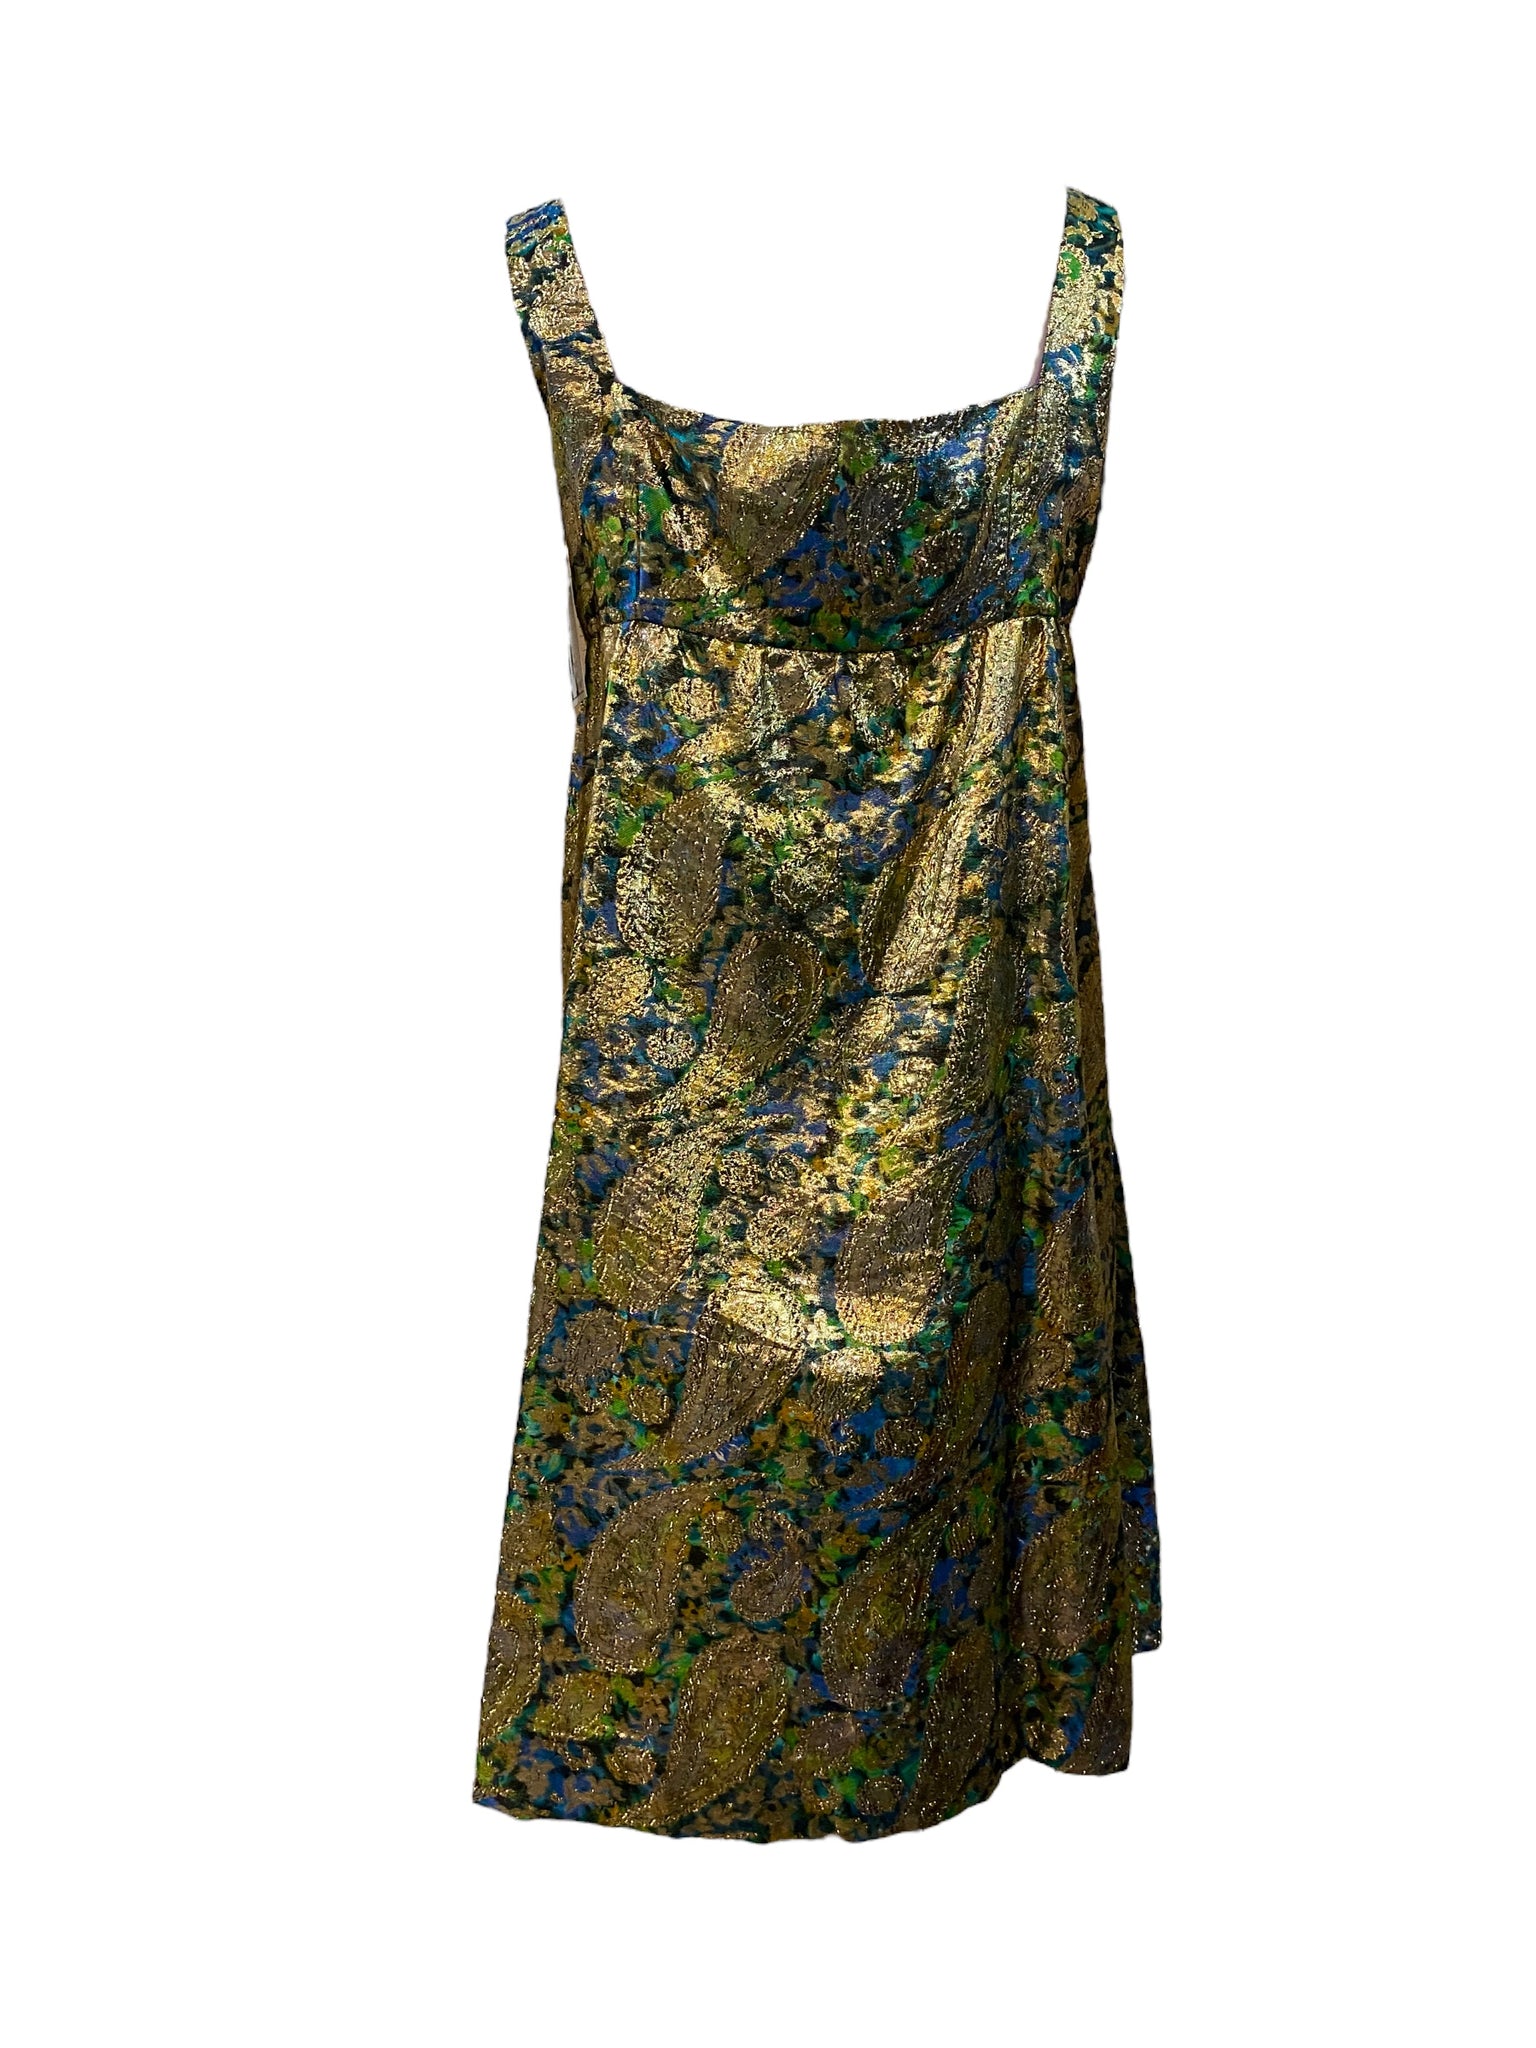 Saks Fifth Avenue 60s Psychedelic  Gold Lame Paisley Mini Dress BACK 3 of 6